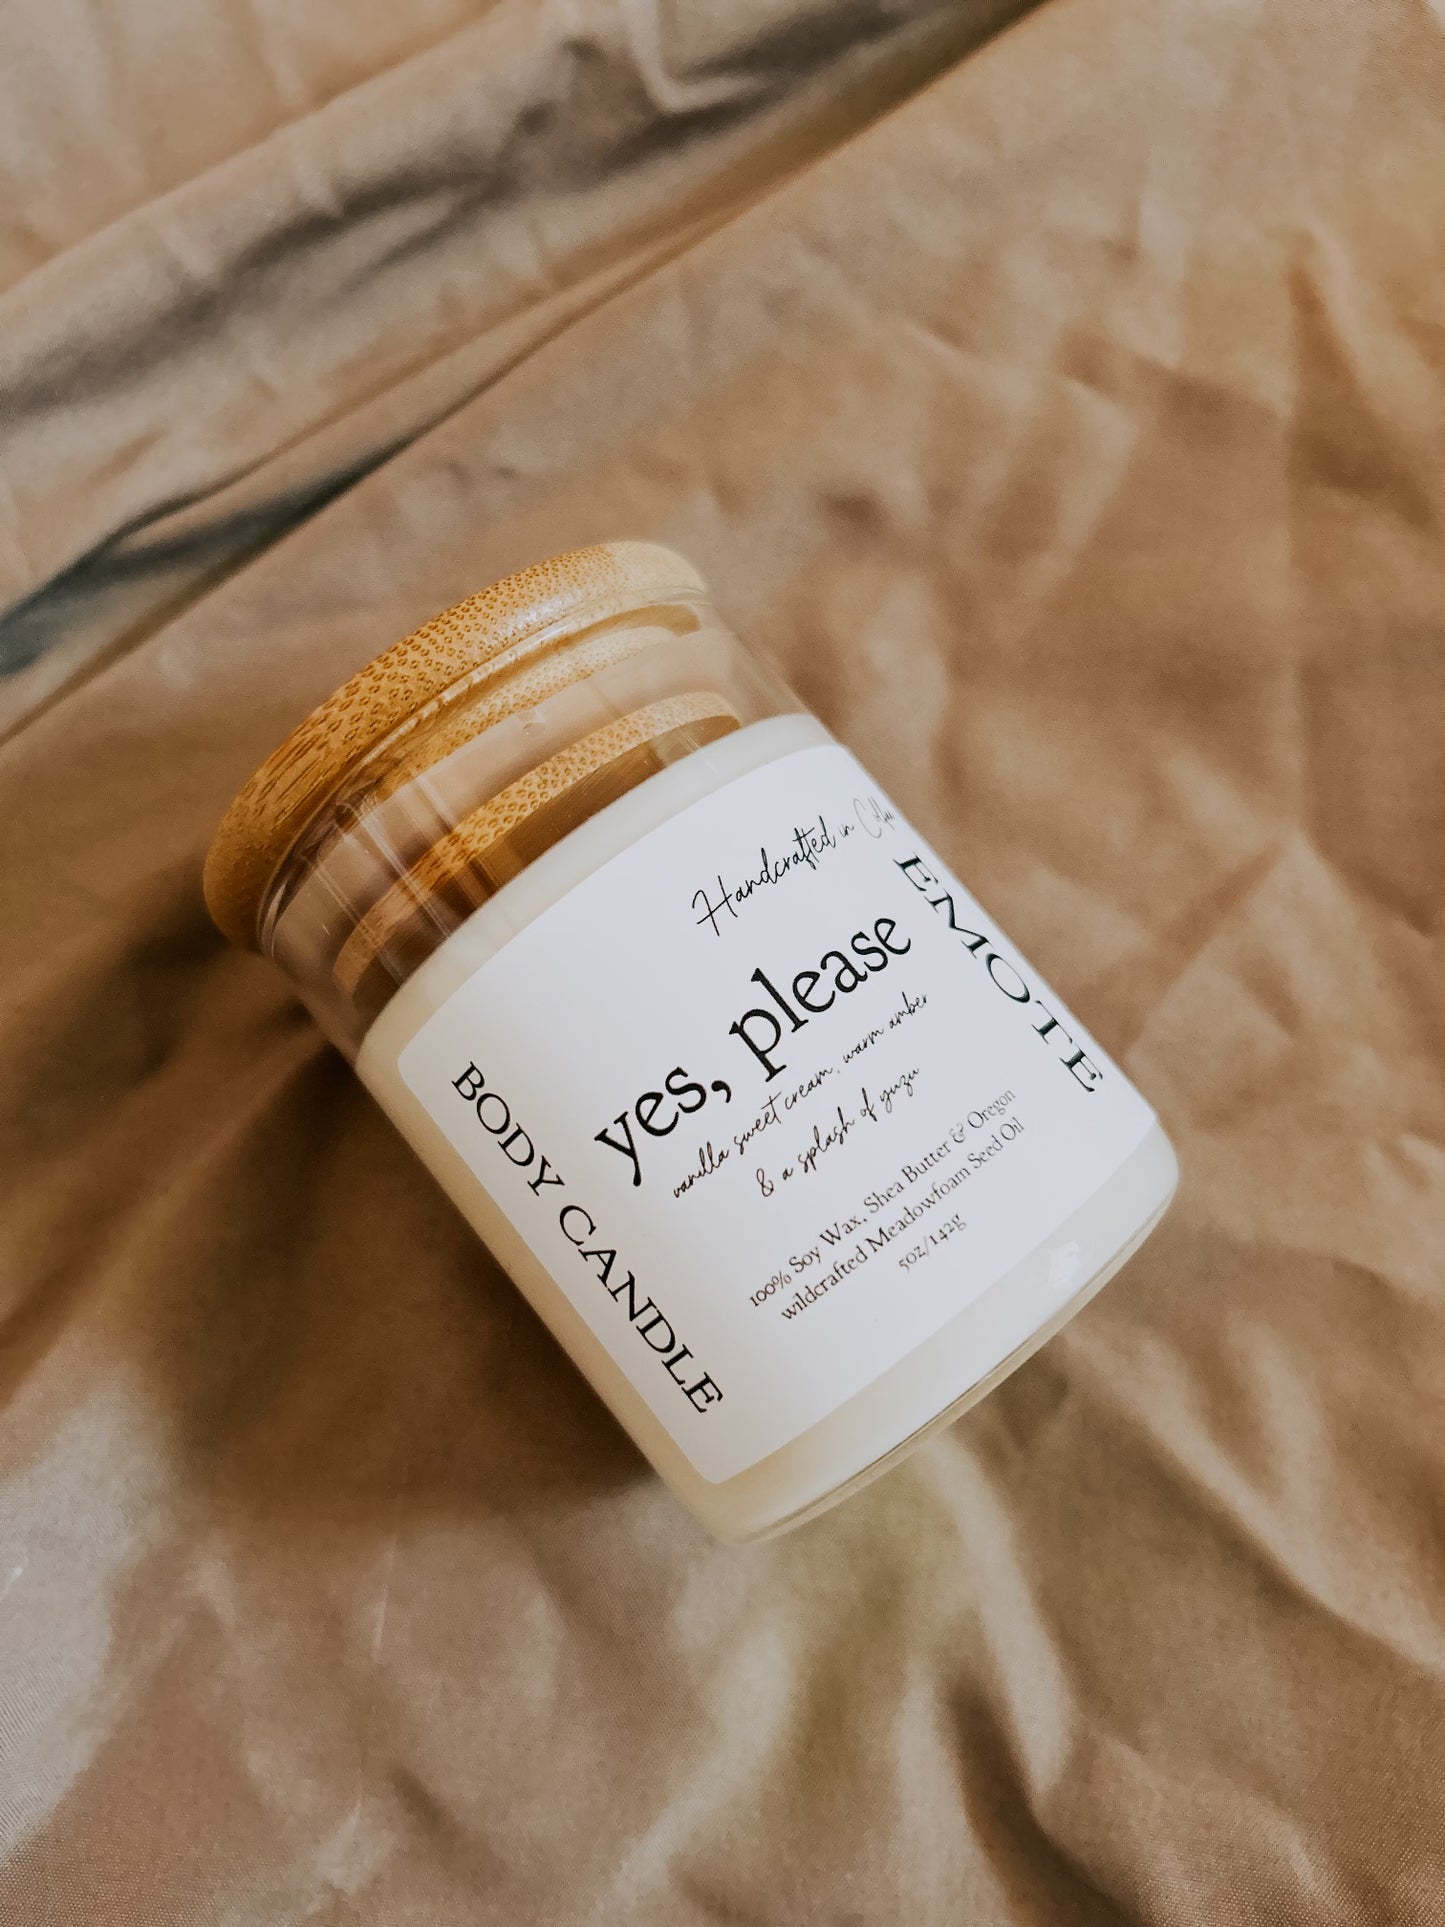 yes, please body candle